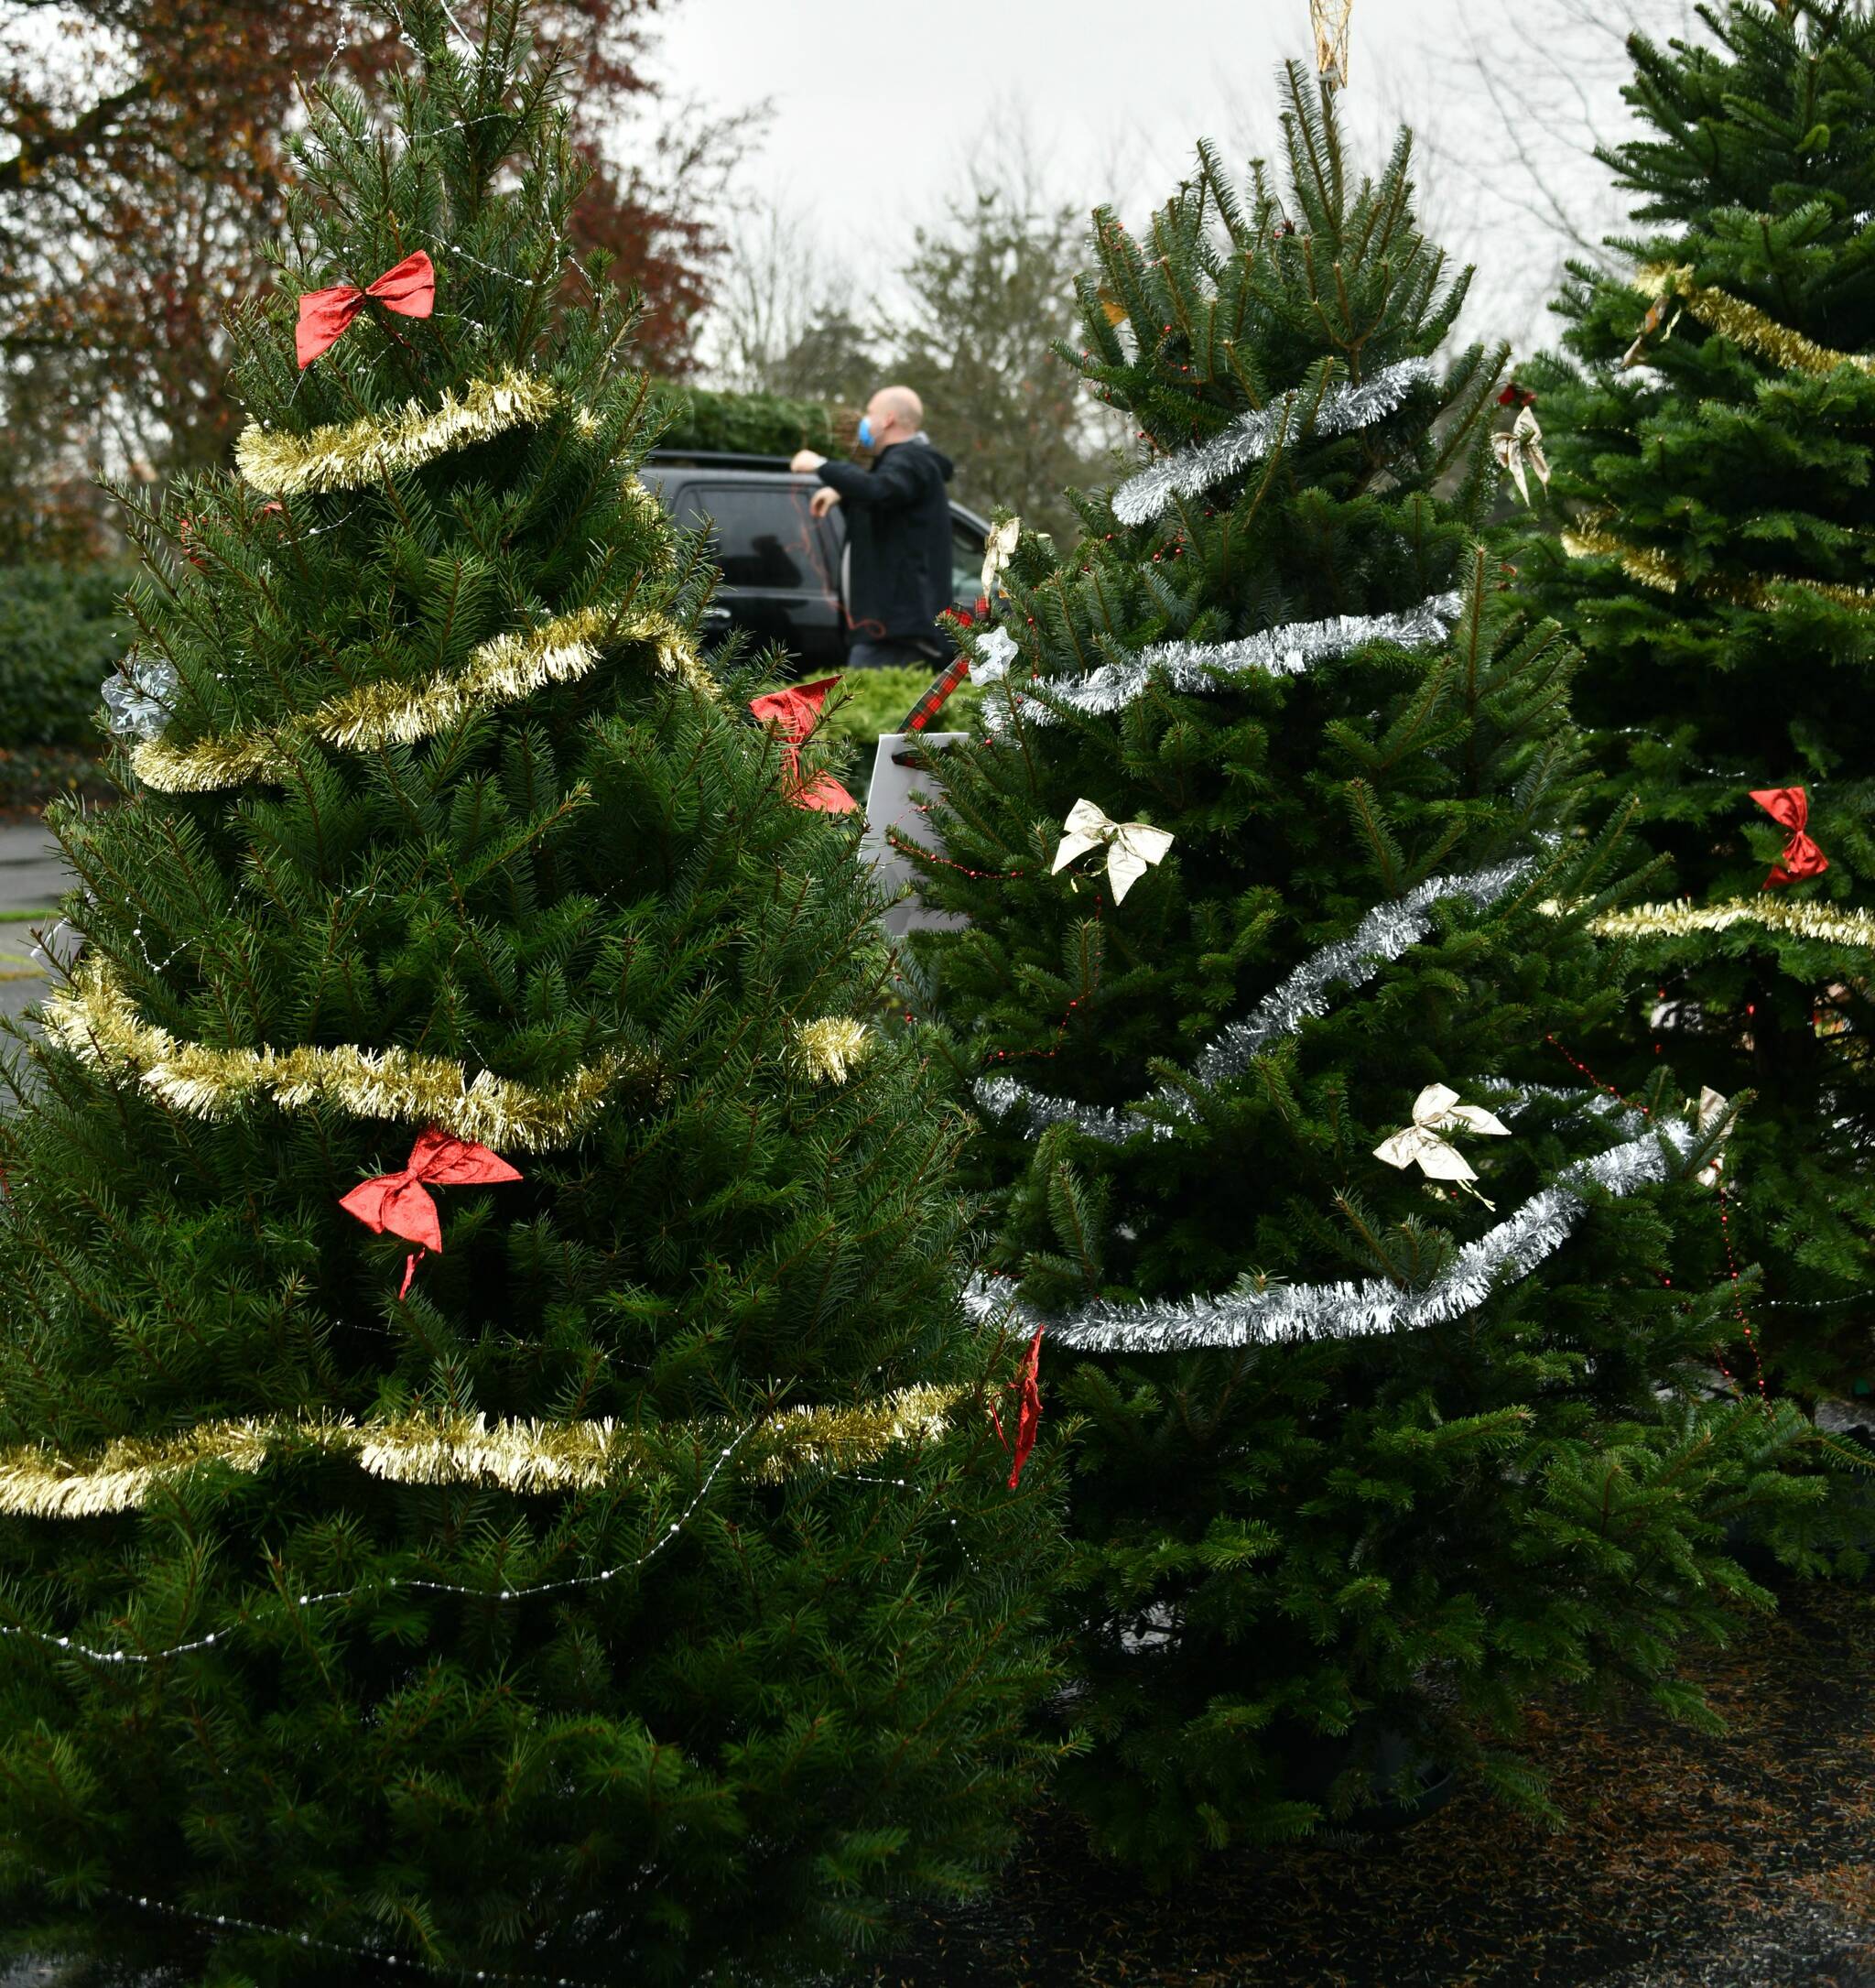 The Mercer Island Youth and Family Services (YFS) Foundation is operating its tree lot, selling a variety of fresh-cut trees at the old Tully’s parking lot at 7810 SE 27th St. Days of operation are through Dec. 12 on Thursdays (3-7 p.m.), Fridays (3-7 p.m.), Saturdays (10 a.m. to 5 p.m.) and Sundays (10 a.m. to 5 p.m.). One-hundred percent of the profits support YFS programs. People can choose from a variety of locally grown Christmas trees, including Noble, Fraser, Douglas, or Nordmann. This year’s lot also includes mixed green wreaths and garland. For more information, visit <a href="https://miyfs.org/treelot/" target="_blank">https://miyfs.org/treelot/</a>. Reporter file photo